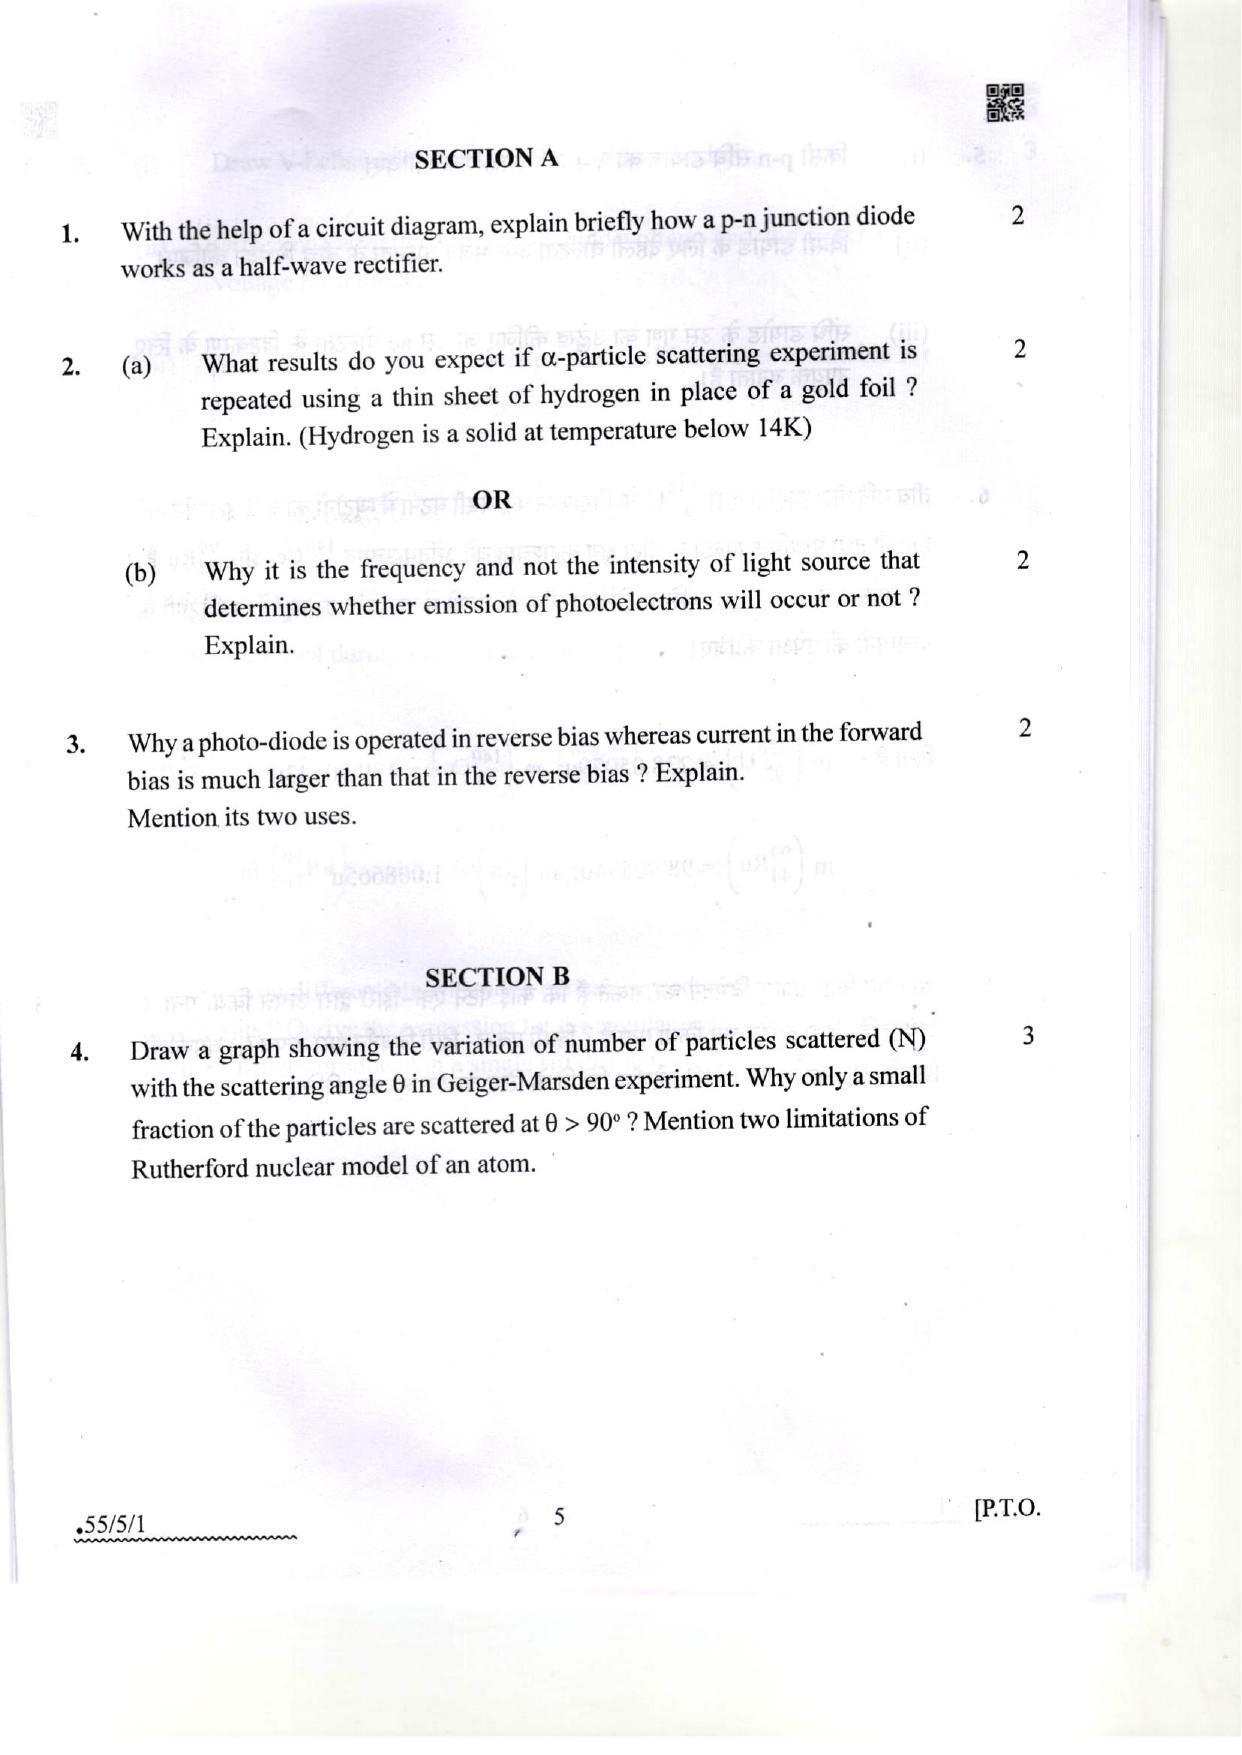 CBSE Class 12 55-5-1 Physics 2022 Question Paper - Page 5